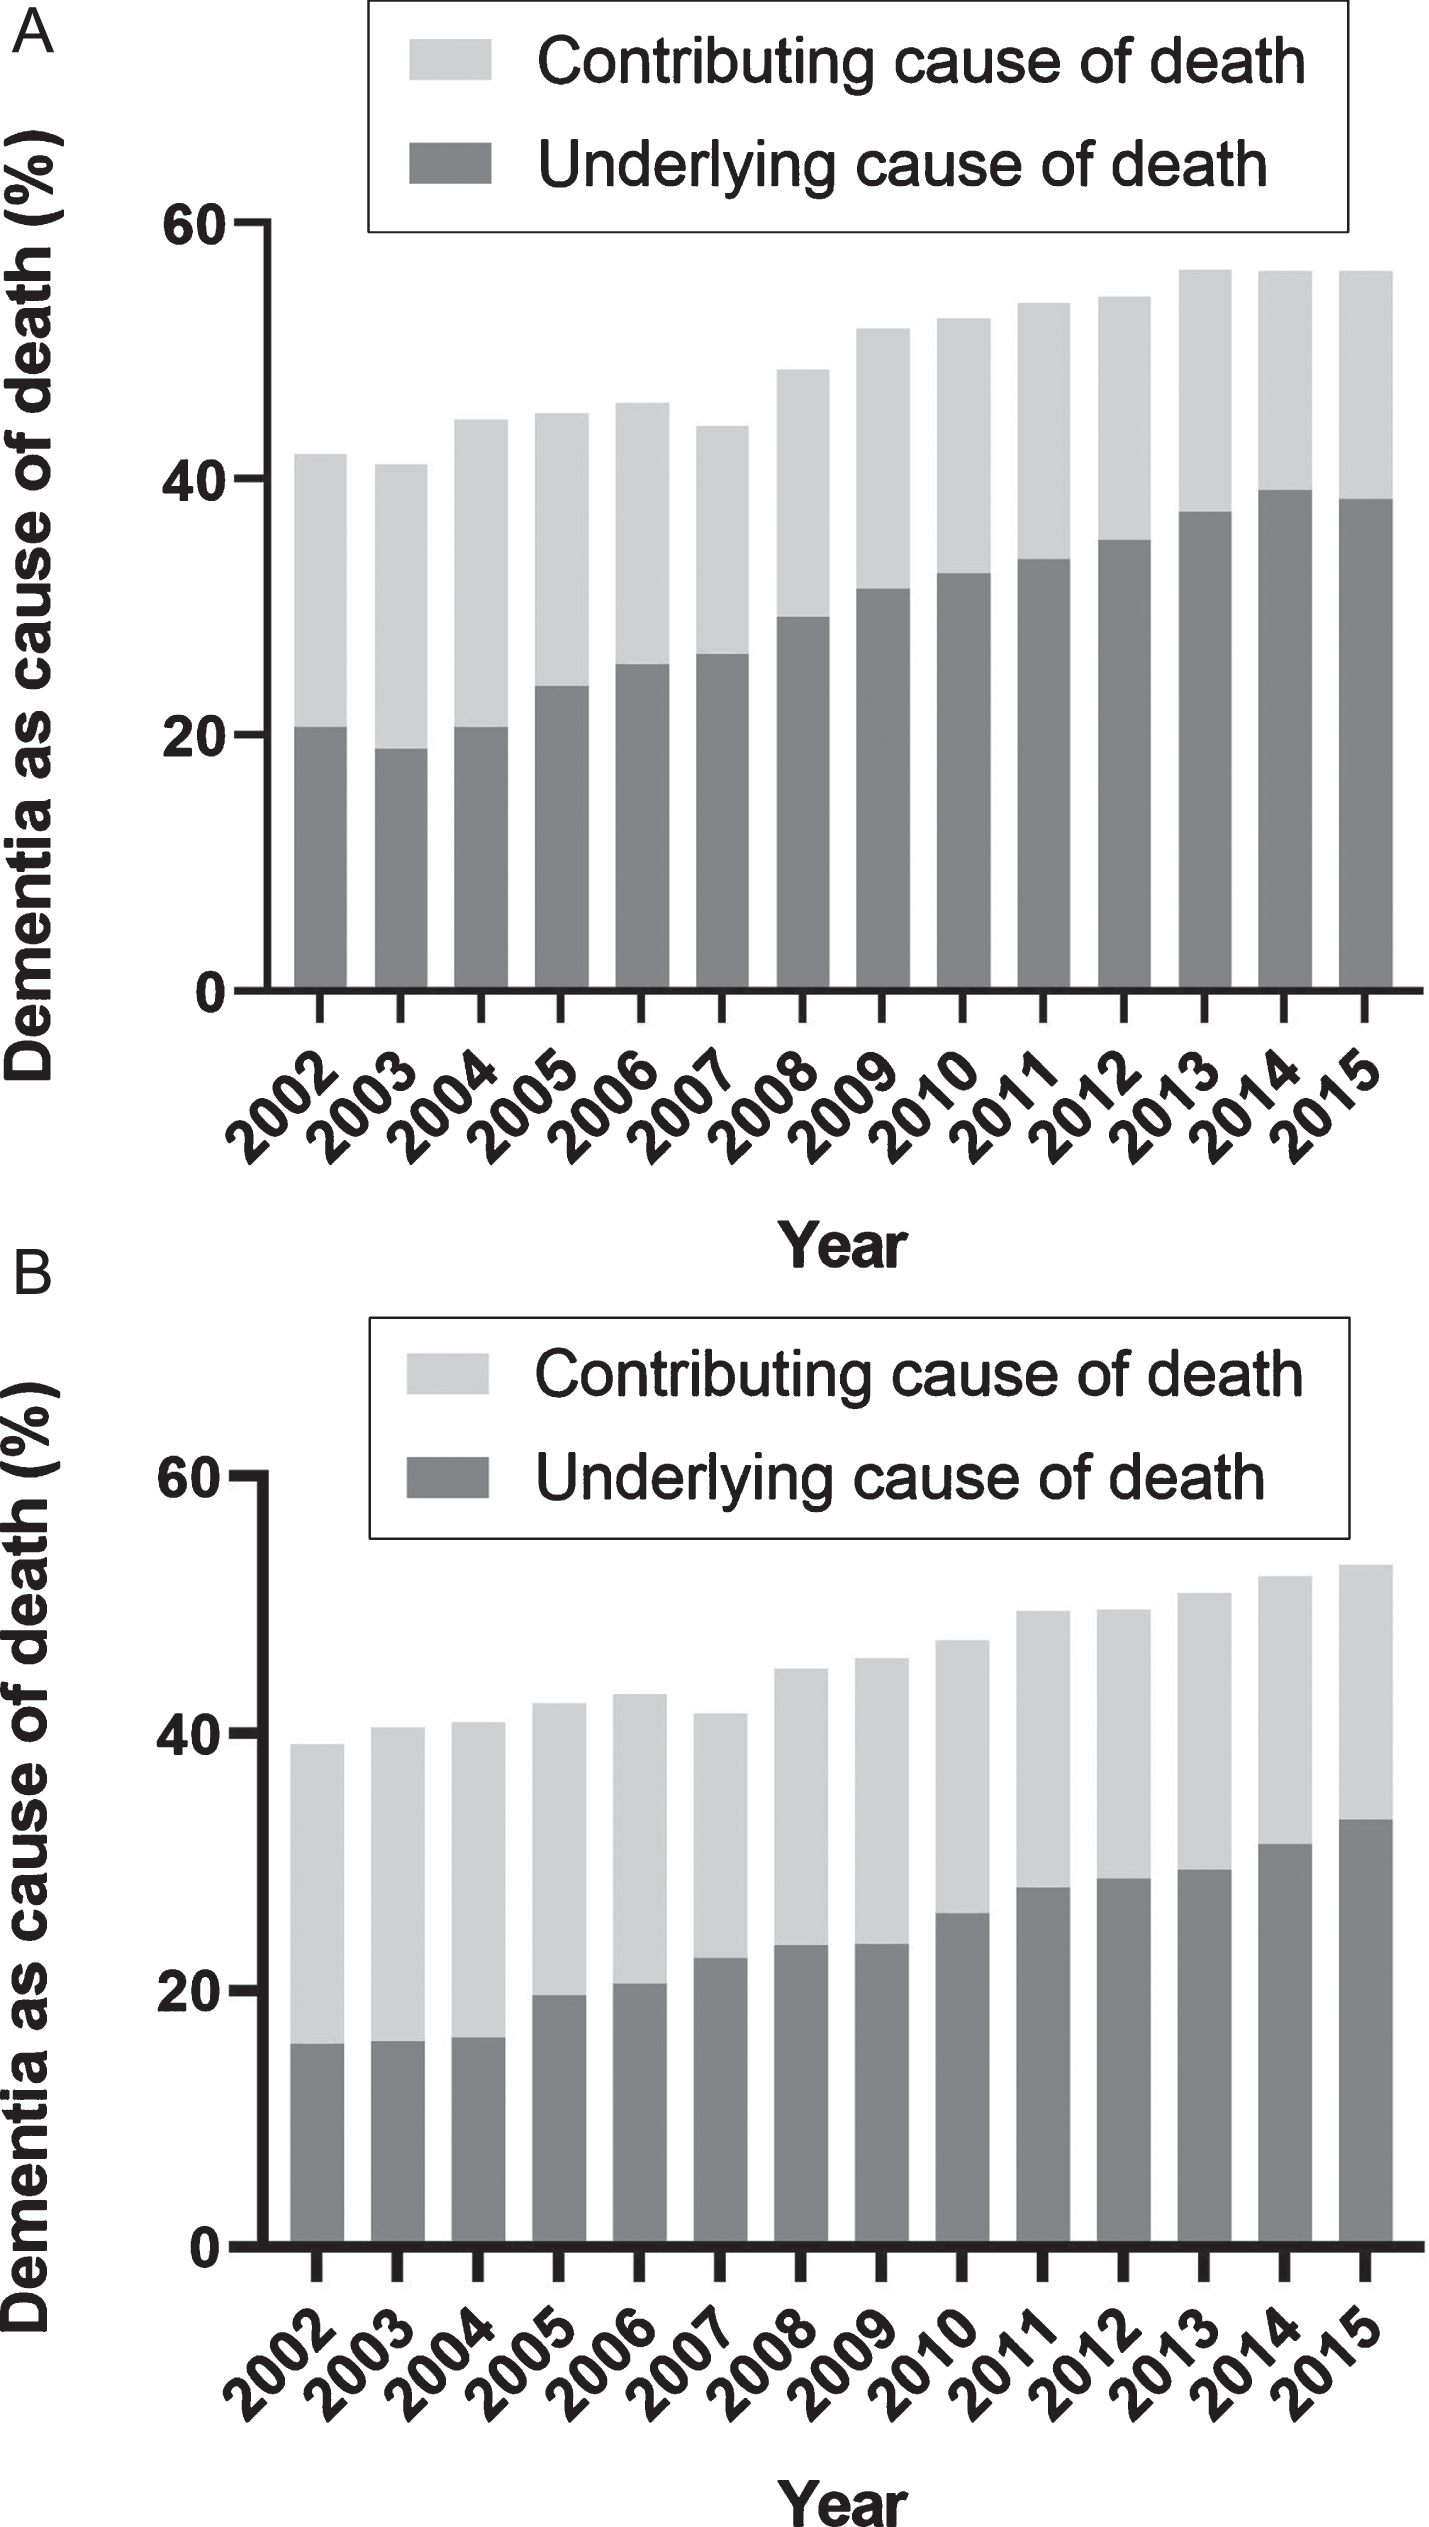 Time trend of the distribution of dementia as cause of death in women and men diagnosed with dementia. Time trend of the distribution of dementia registered as contributing or underlying cause of death in women (A) and men (B) with diagnosed dementia.